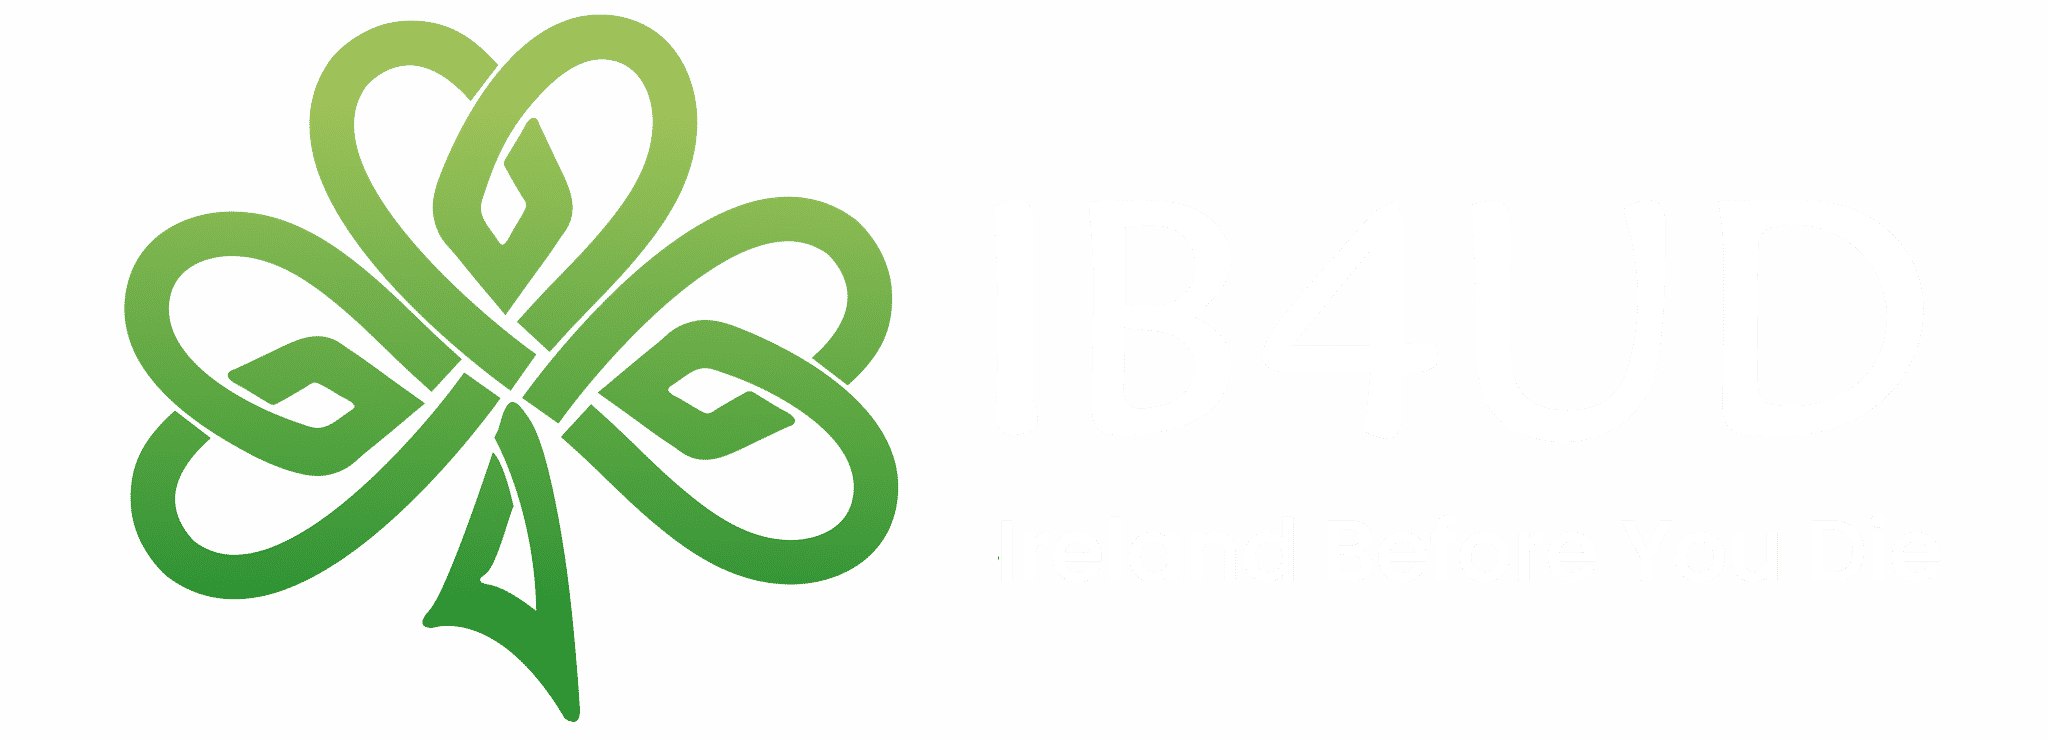 ib4ud-new-logo-cropped.png